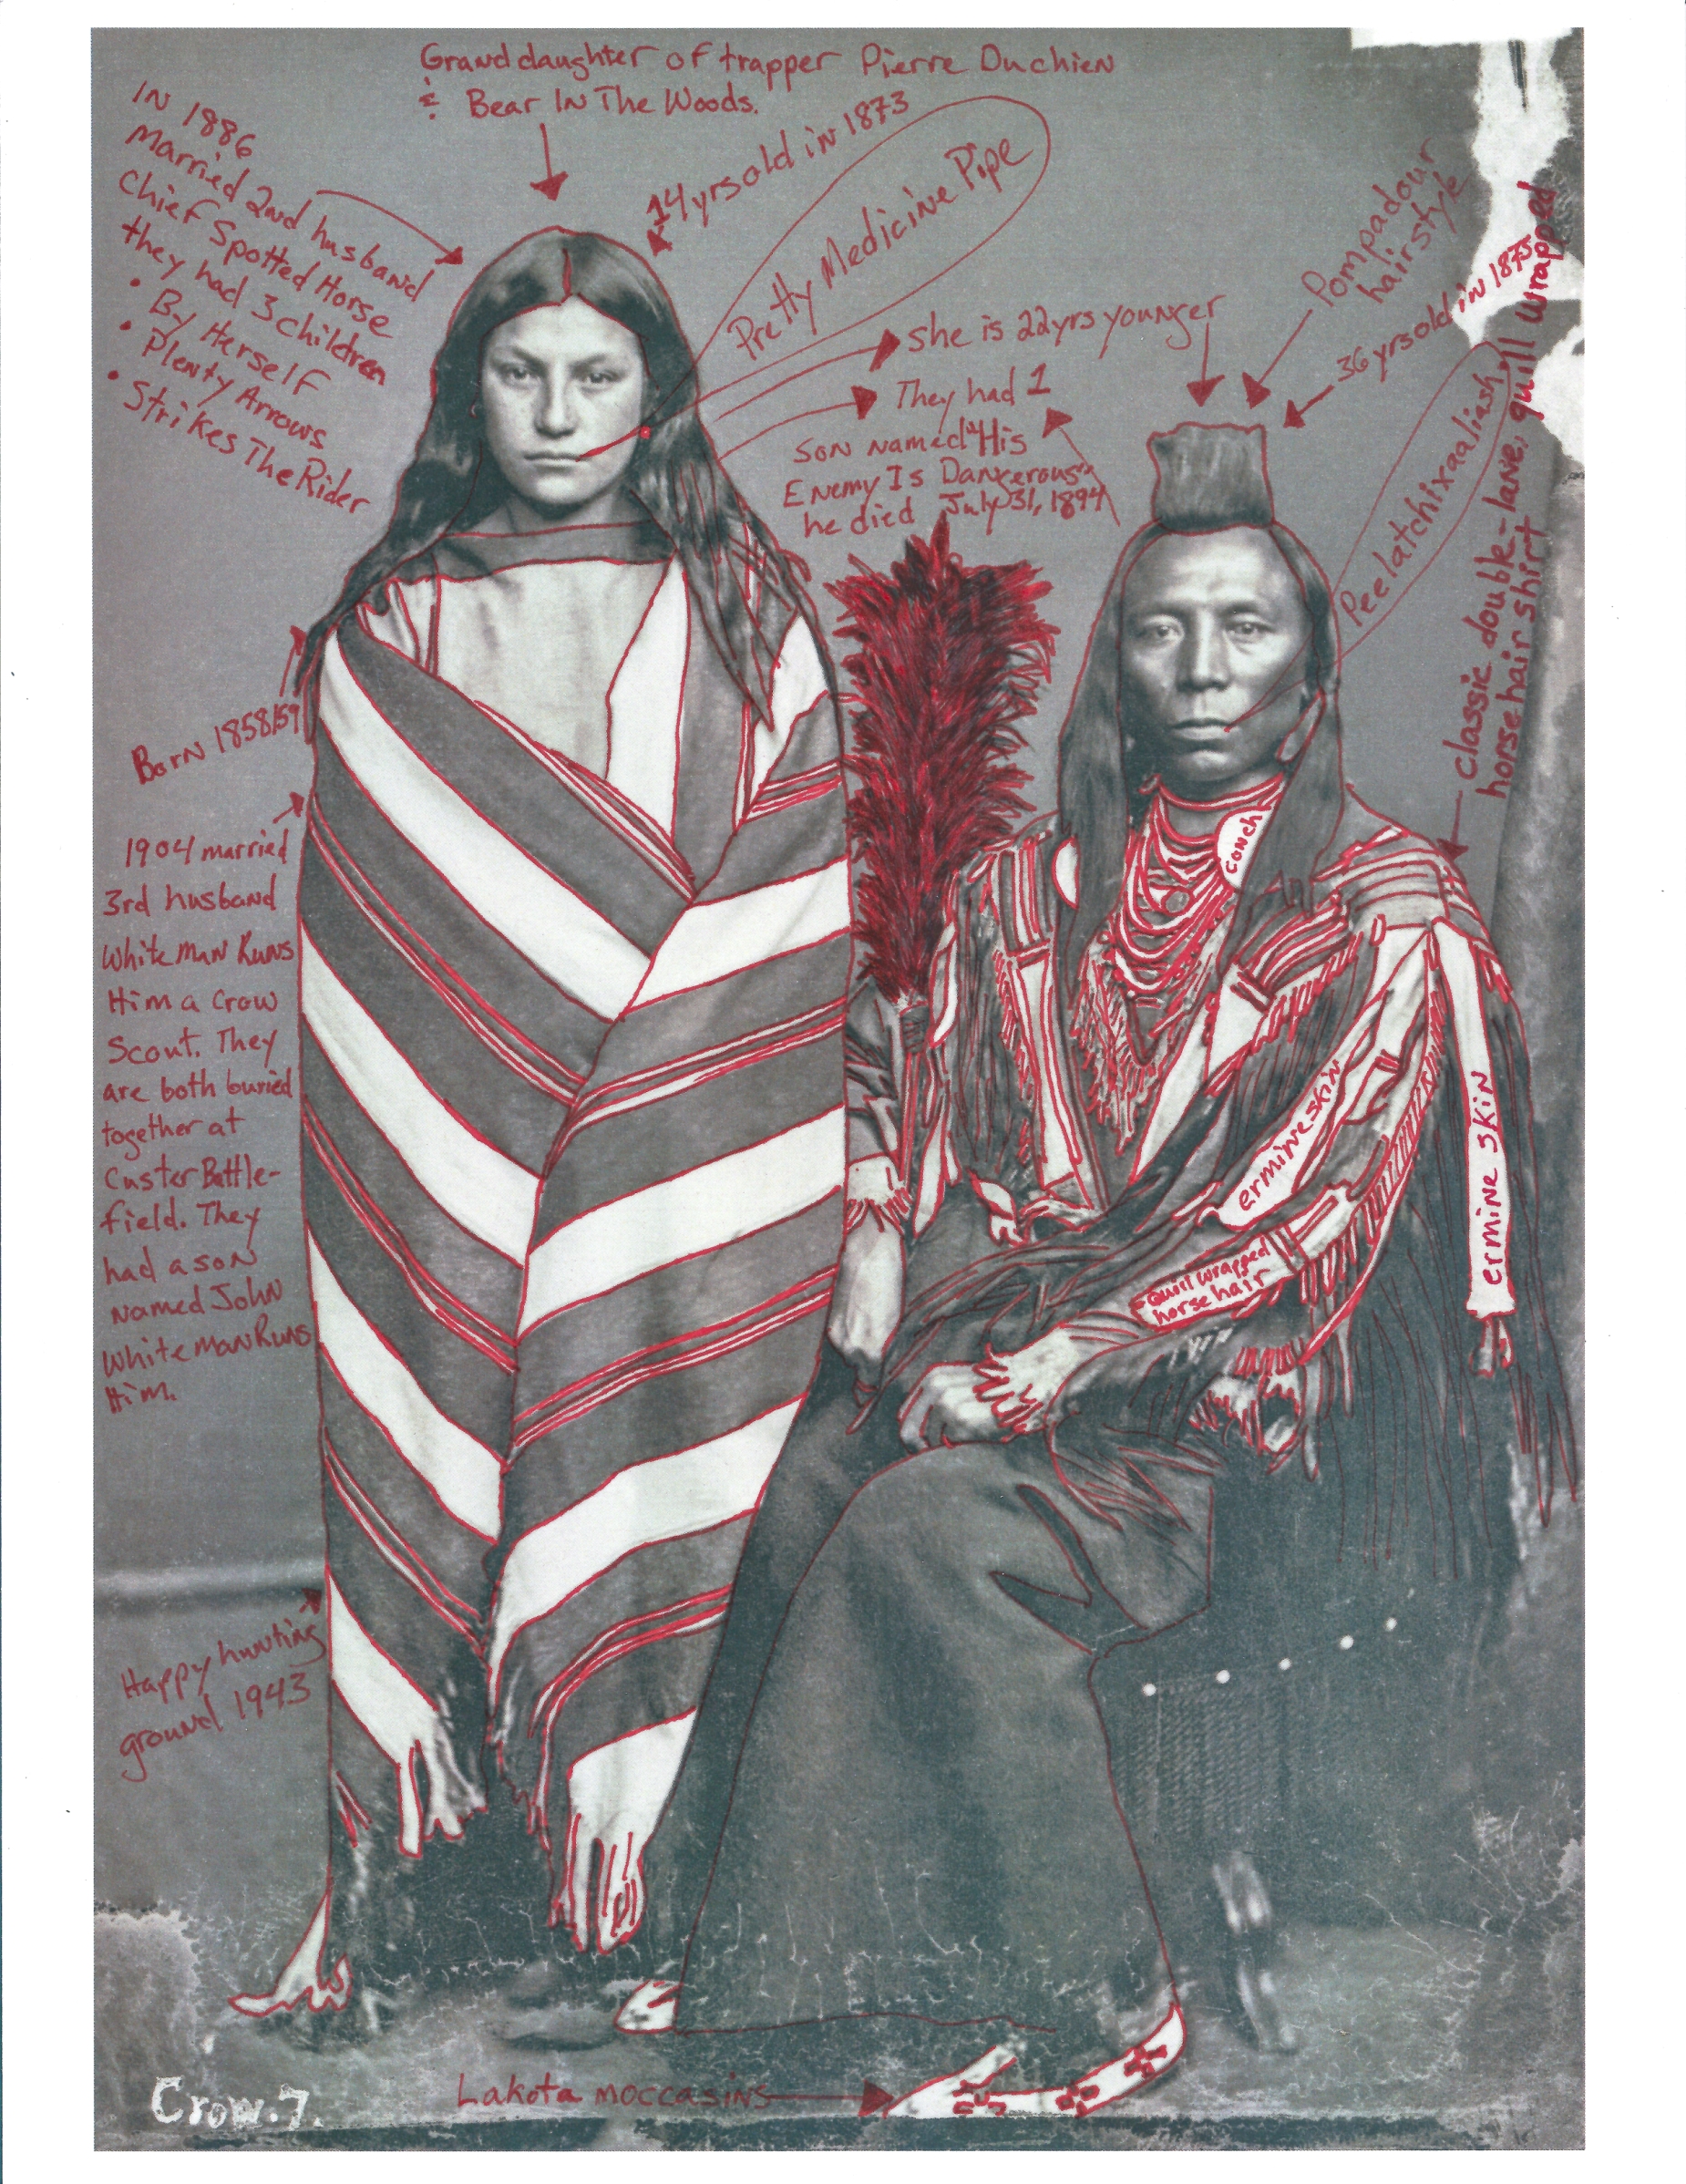 Wendy Red Star, Portrait of Perits-Har-Sts (Old Crow) and with His Wife, Ish-Ip-Chi-Wak-Pa-I-Chis (Good or Pretty Medicine Pipe) – from the series Diplomats of the Crow Nation, 1873 Crow Delegation, 2017. Pigment print on archival photo-paper, 17 x 25 in. (43.2 x 63.5 cm). Collection of the artist © Wendy Red Star